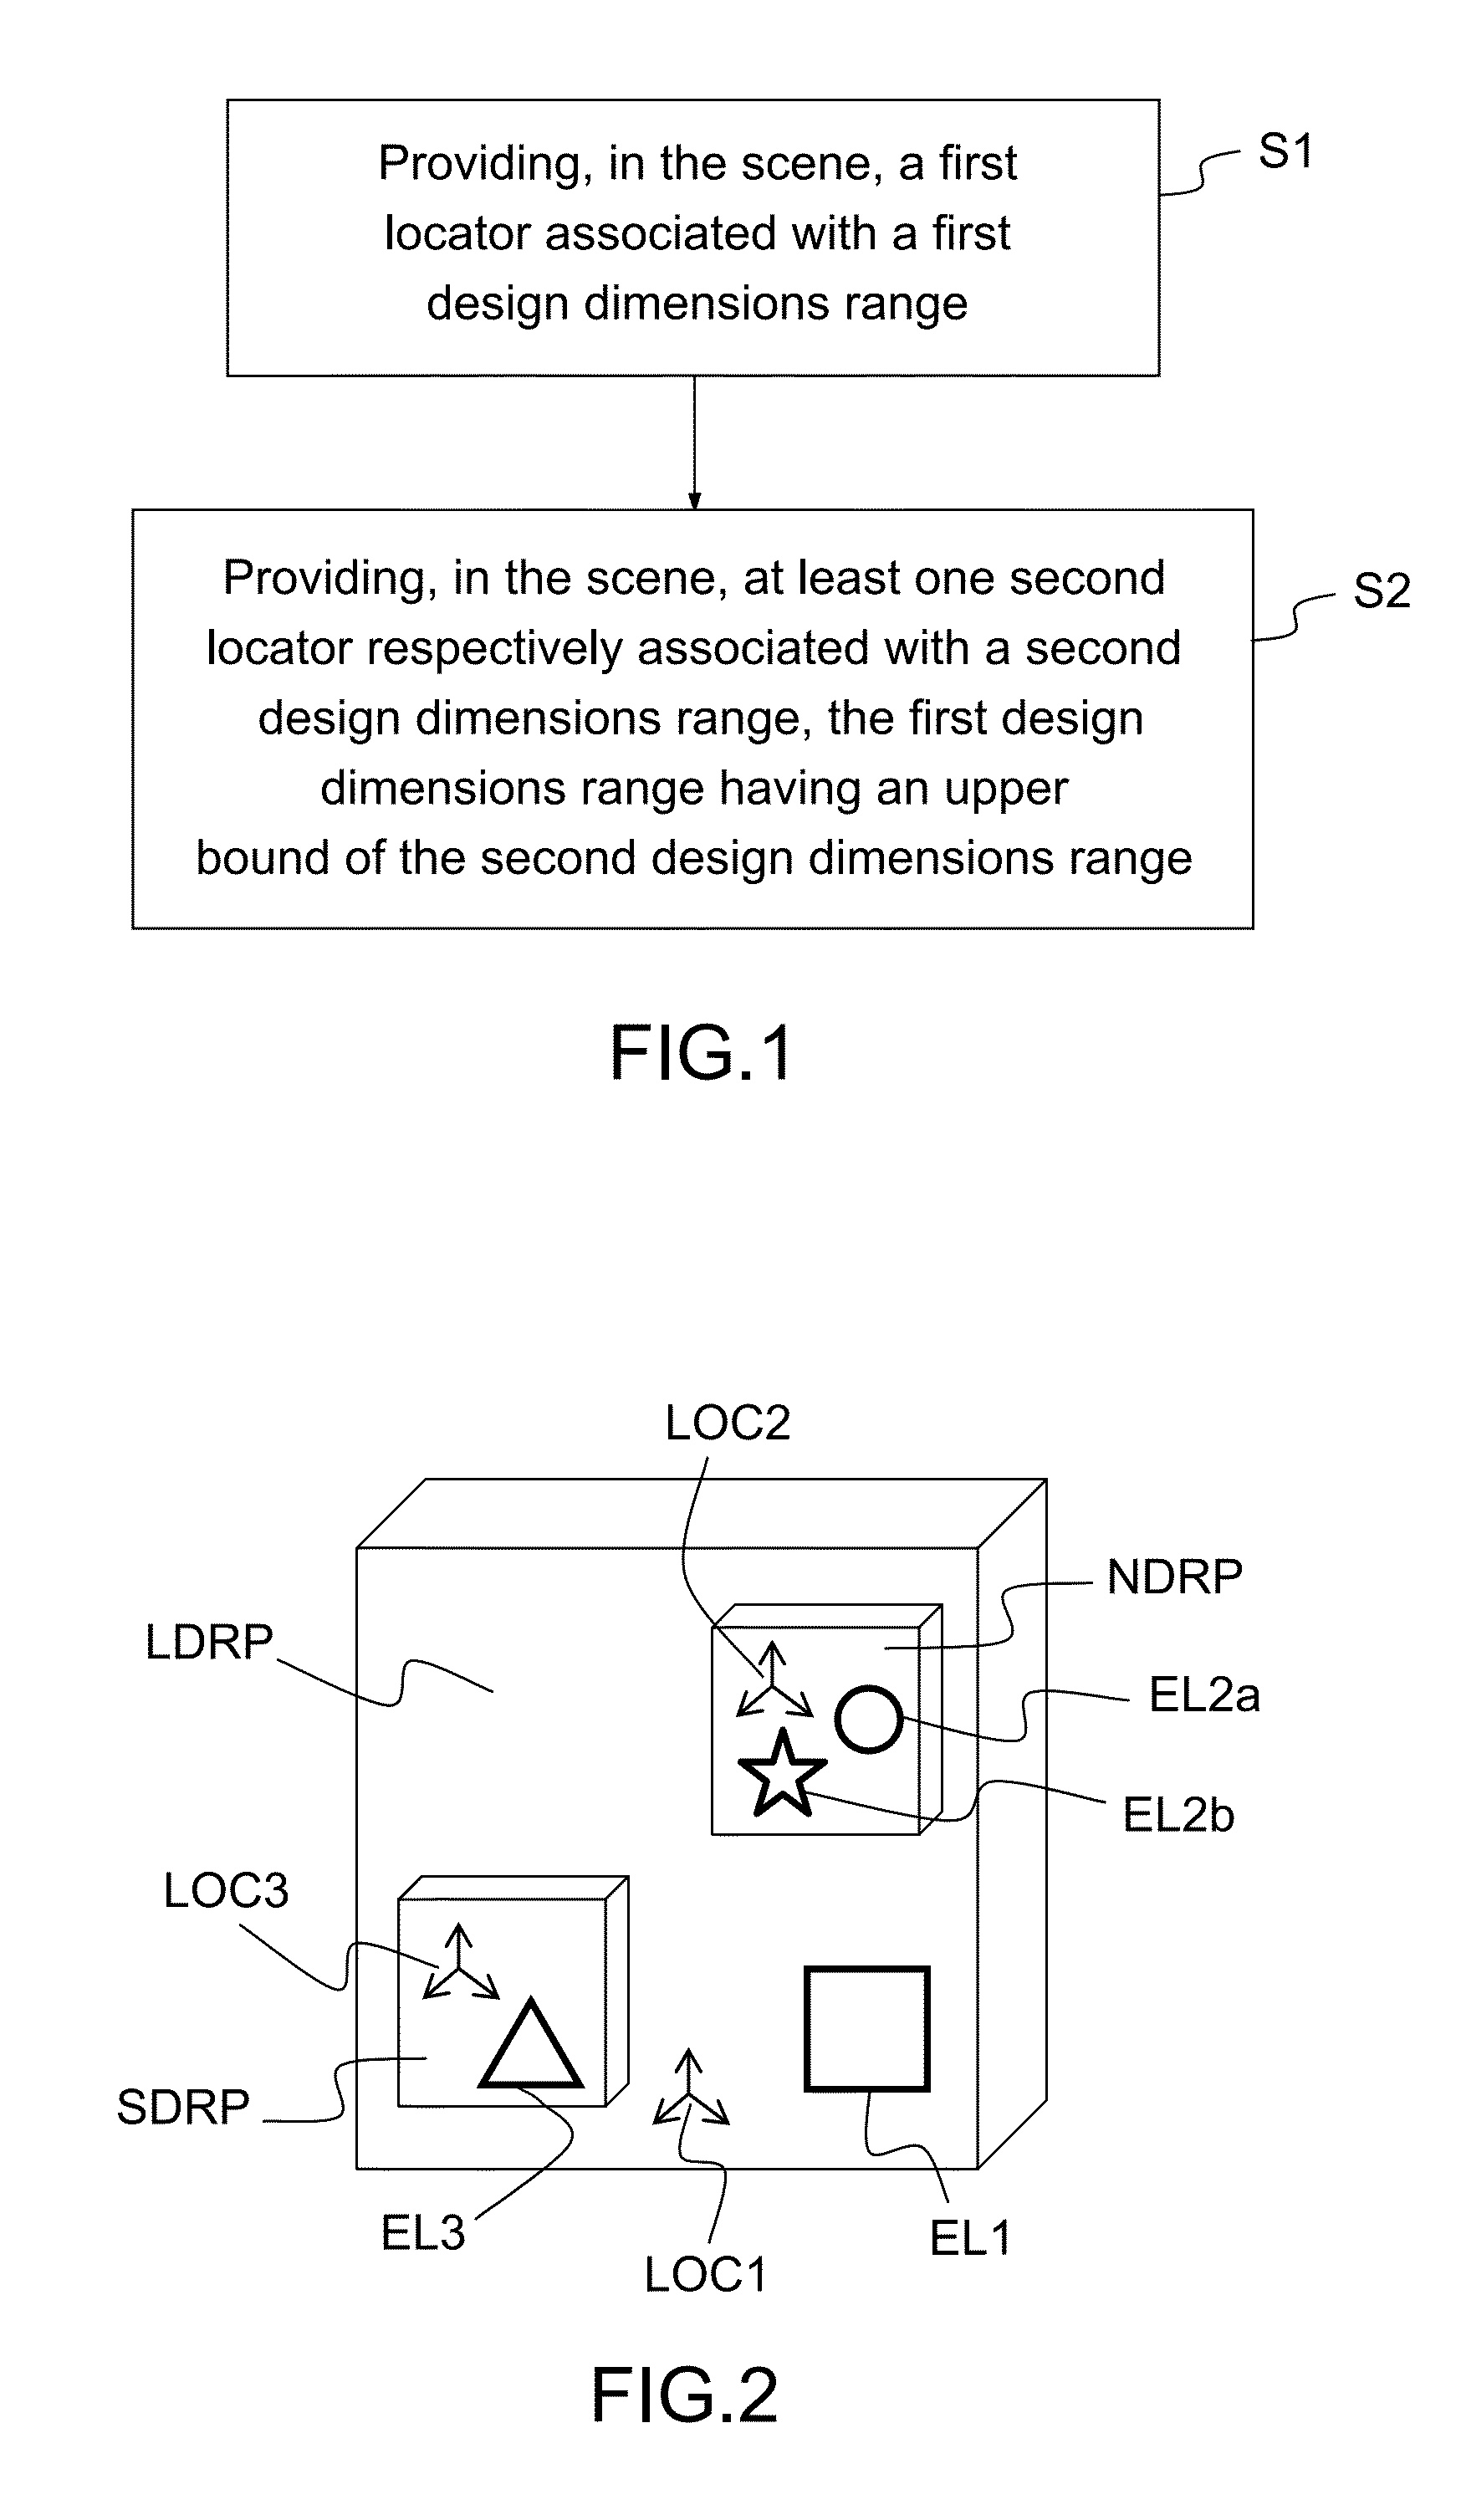 Computer-implemented method for designing an assembly of objects in a three-dimensional scene of a system of computer-aided design